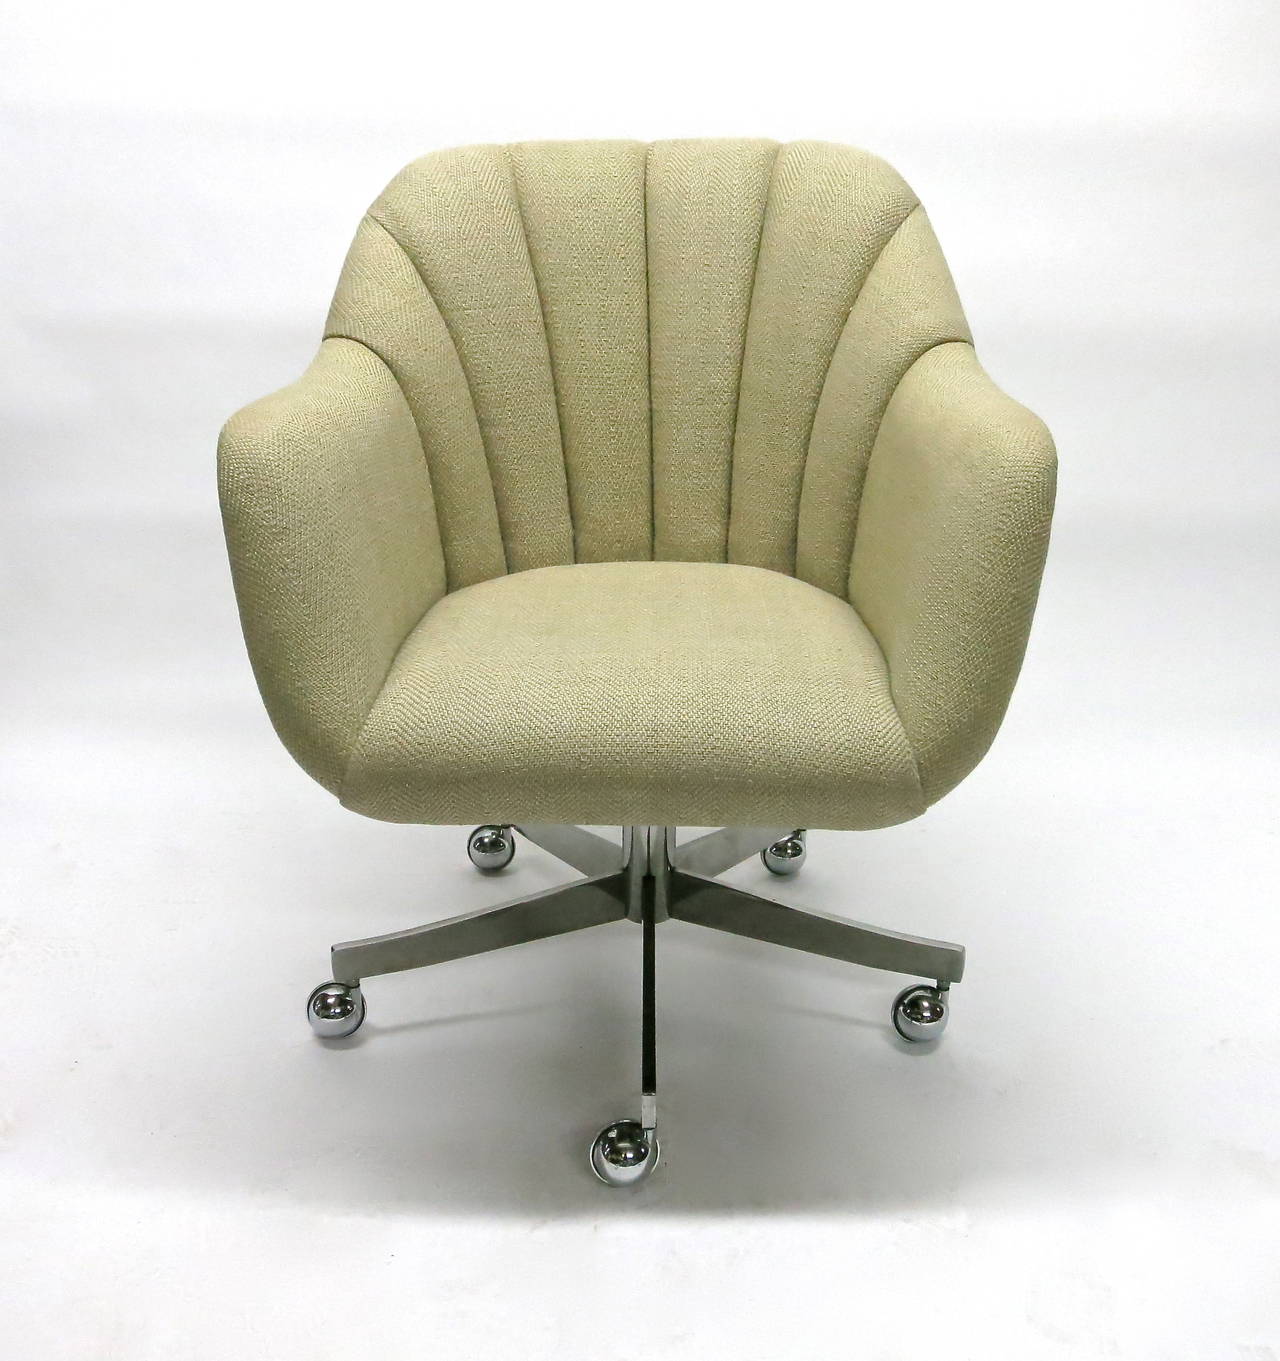 Swiveling desk chair in original fabric and on castors. There are three labels underneath and one property tag attached. The chair was the property of VAH and purchased from Brickell in 1984. Image #9 shows the standard red label of Ward Bennett for